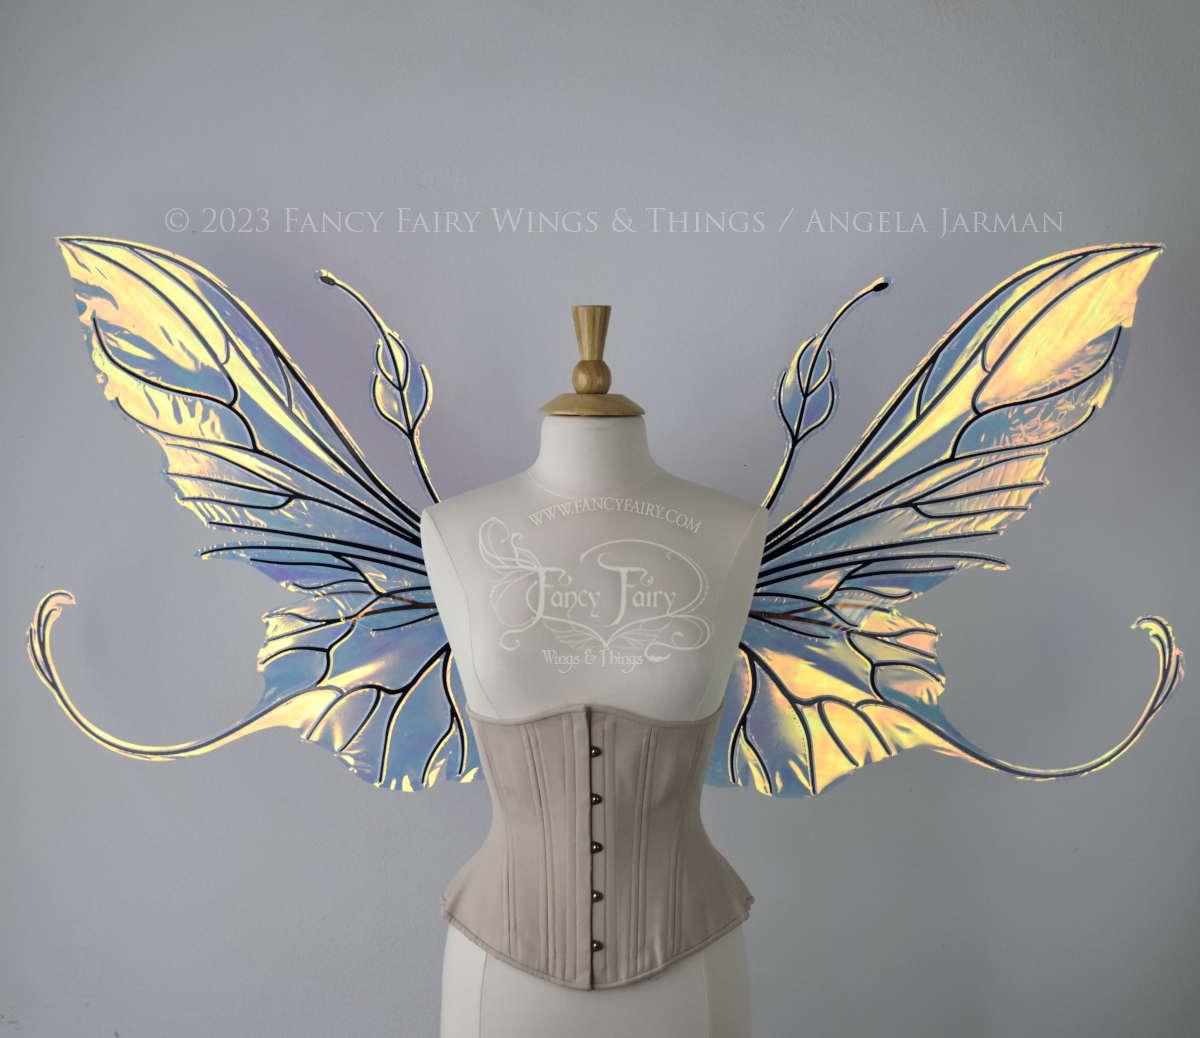 Front view of an ivory dress form wearing an alabaster underbust corset & extra large iridescent fairy wings with elongated upper panels & antennae with bottom panels that have a tail curving upwards, black veins. Background is white / light grey